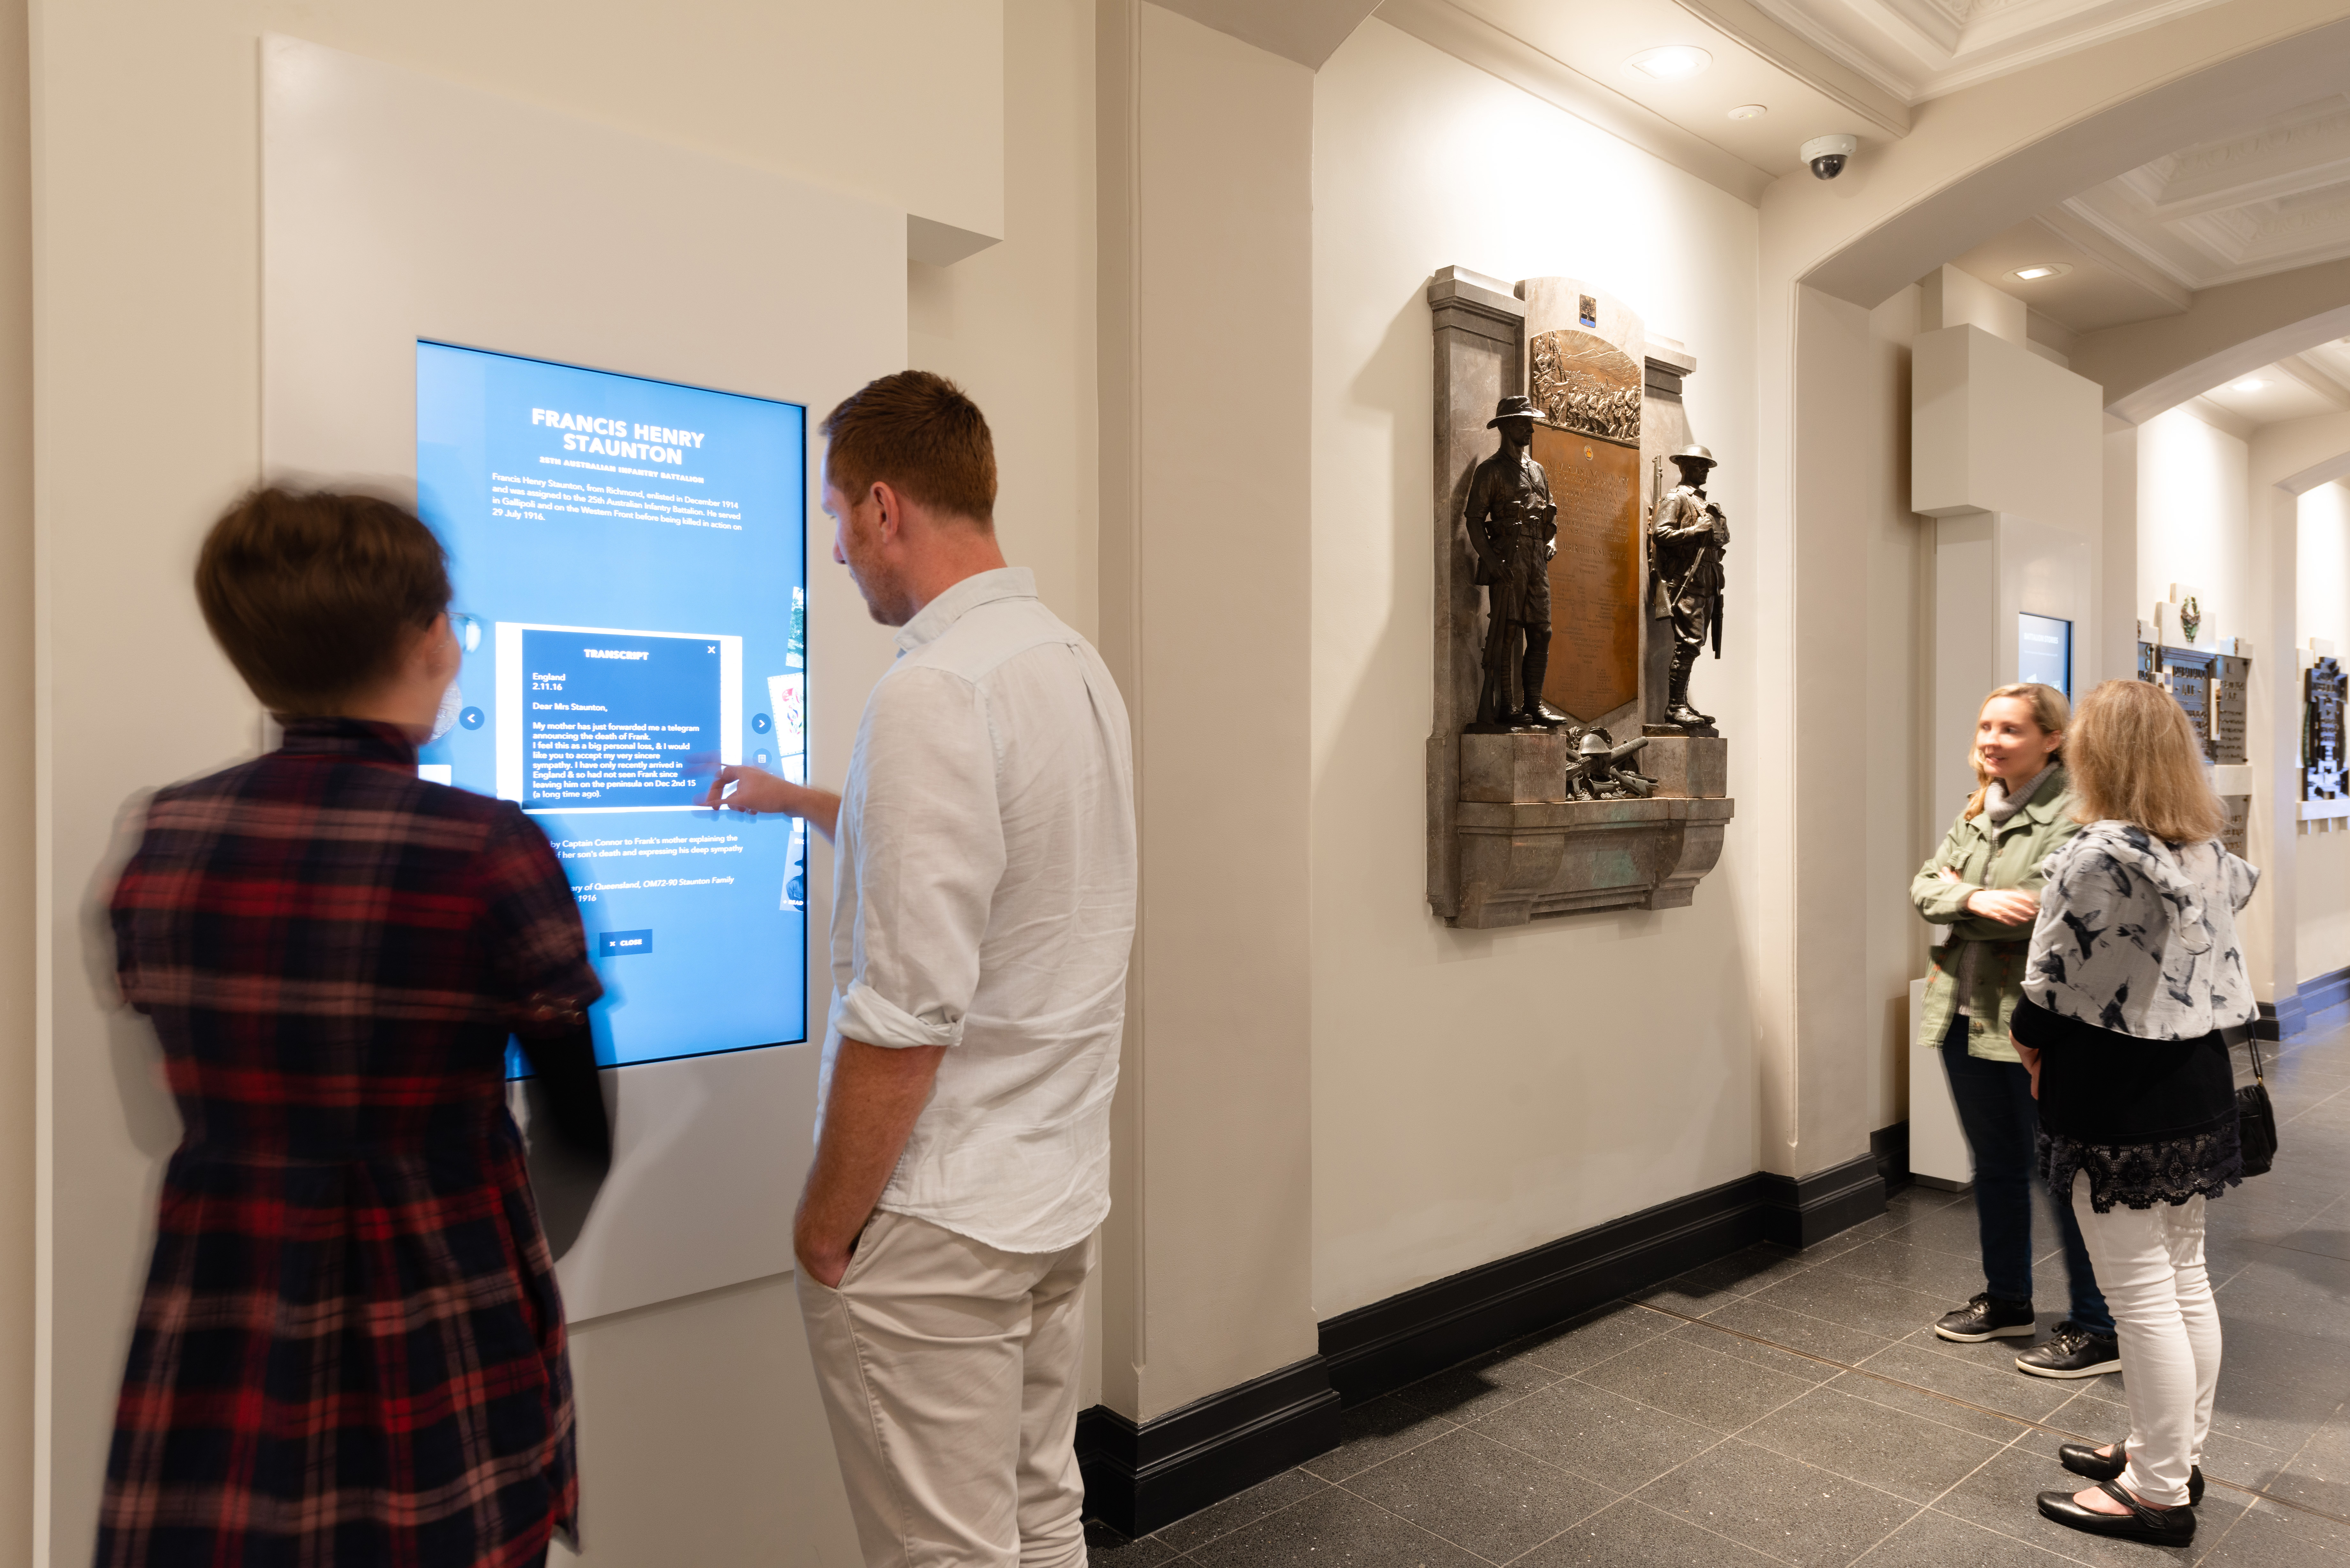 Two groups of people using a touch screen and viewing a memorial plaque.